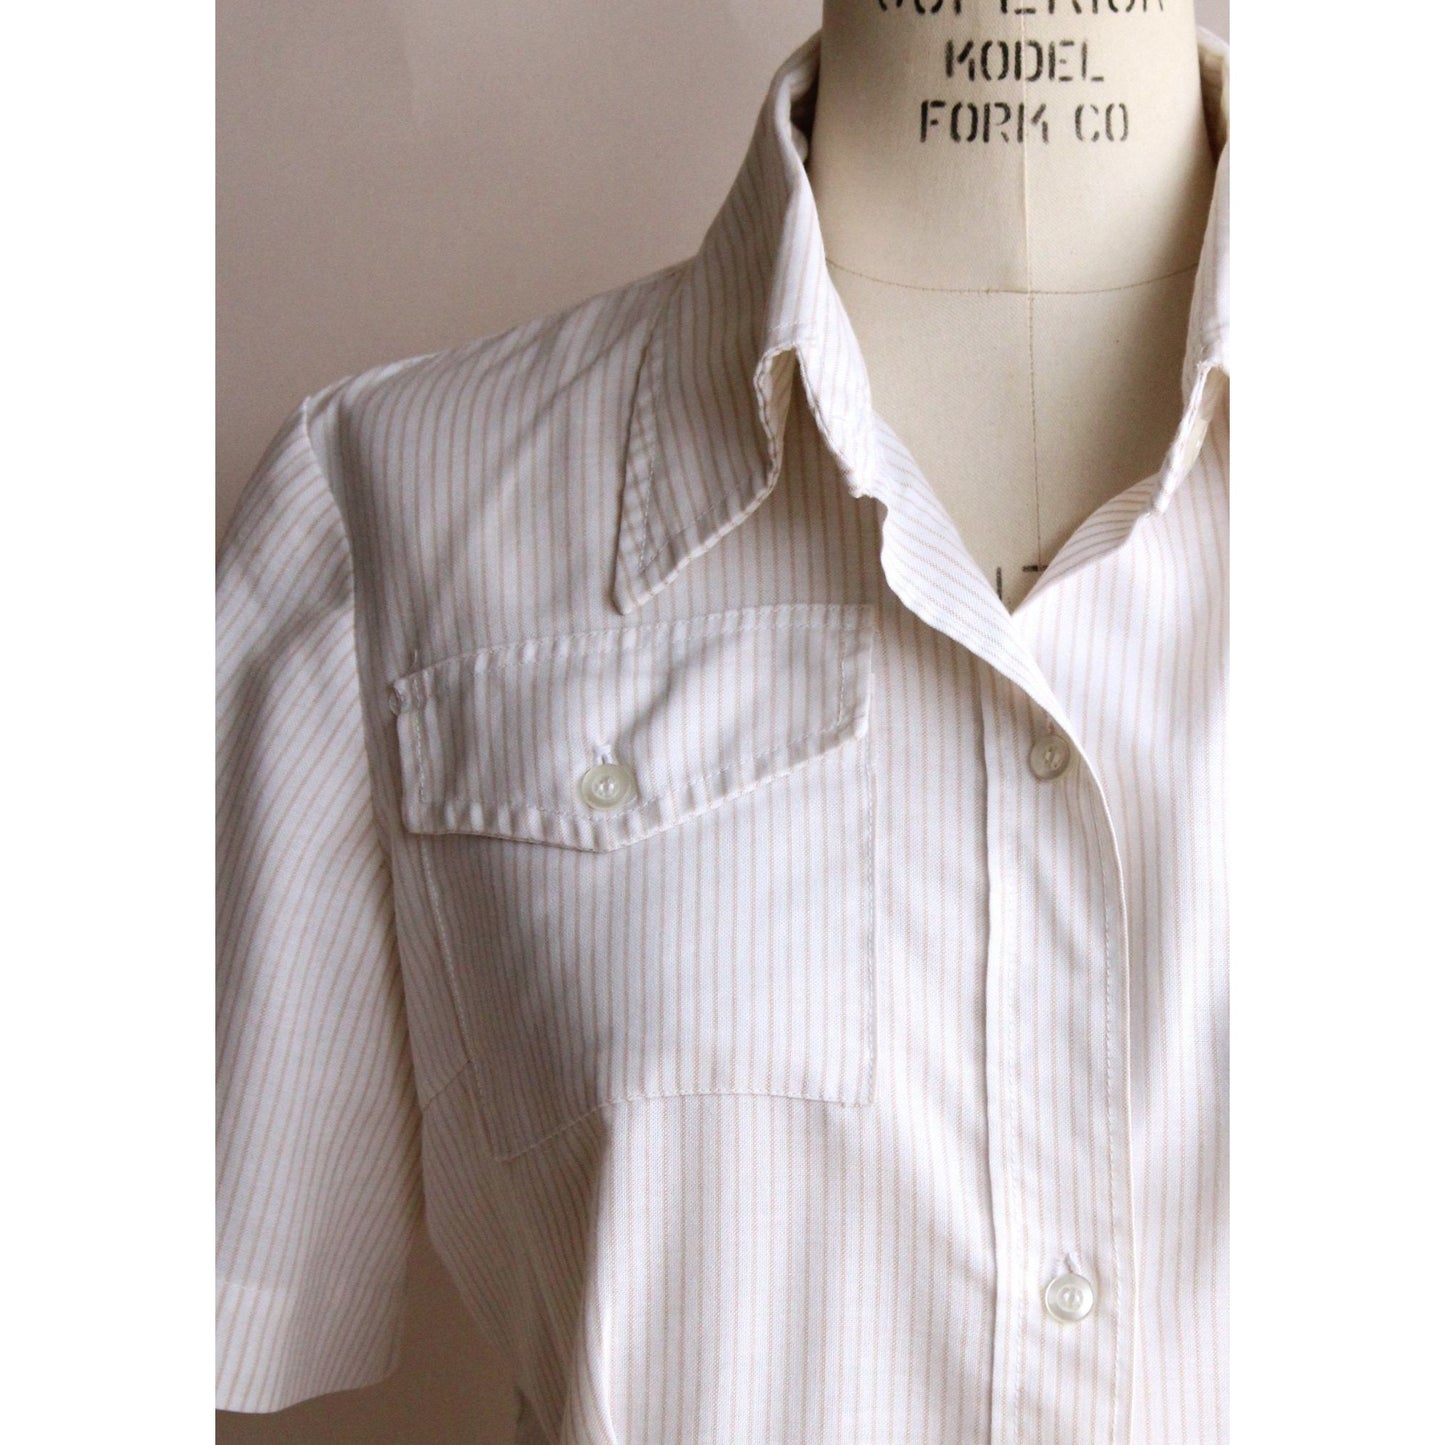 Vintage 1970s Tan and White Pinstriped Short Sleeved Shirt